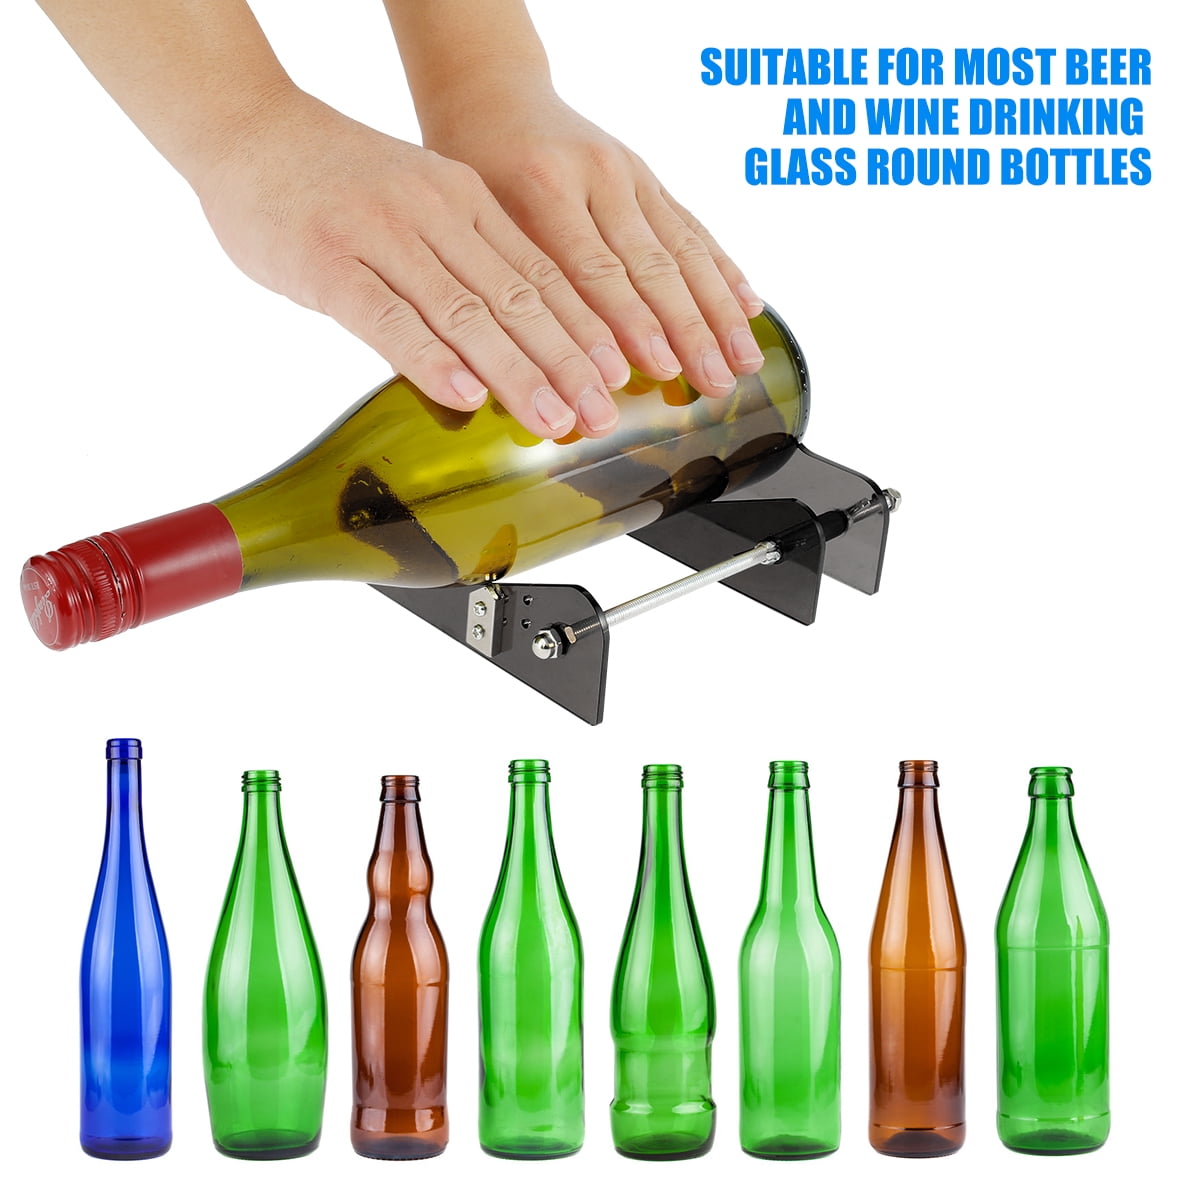 How to Make a Glass Bottle Cutter - DIY Wine Bottle Cutting Tool! : 7 Steps  (with Pictures) - Instructables